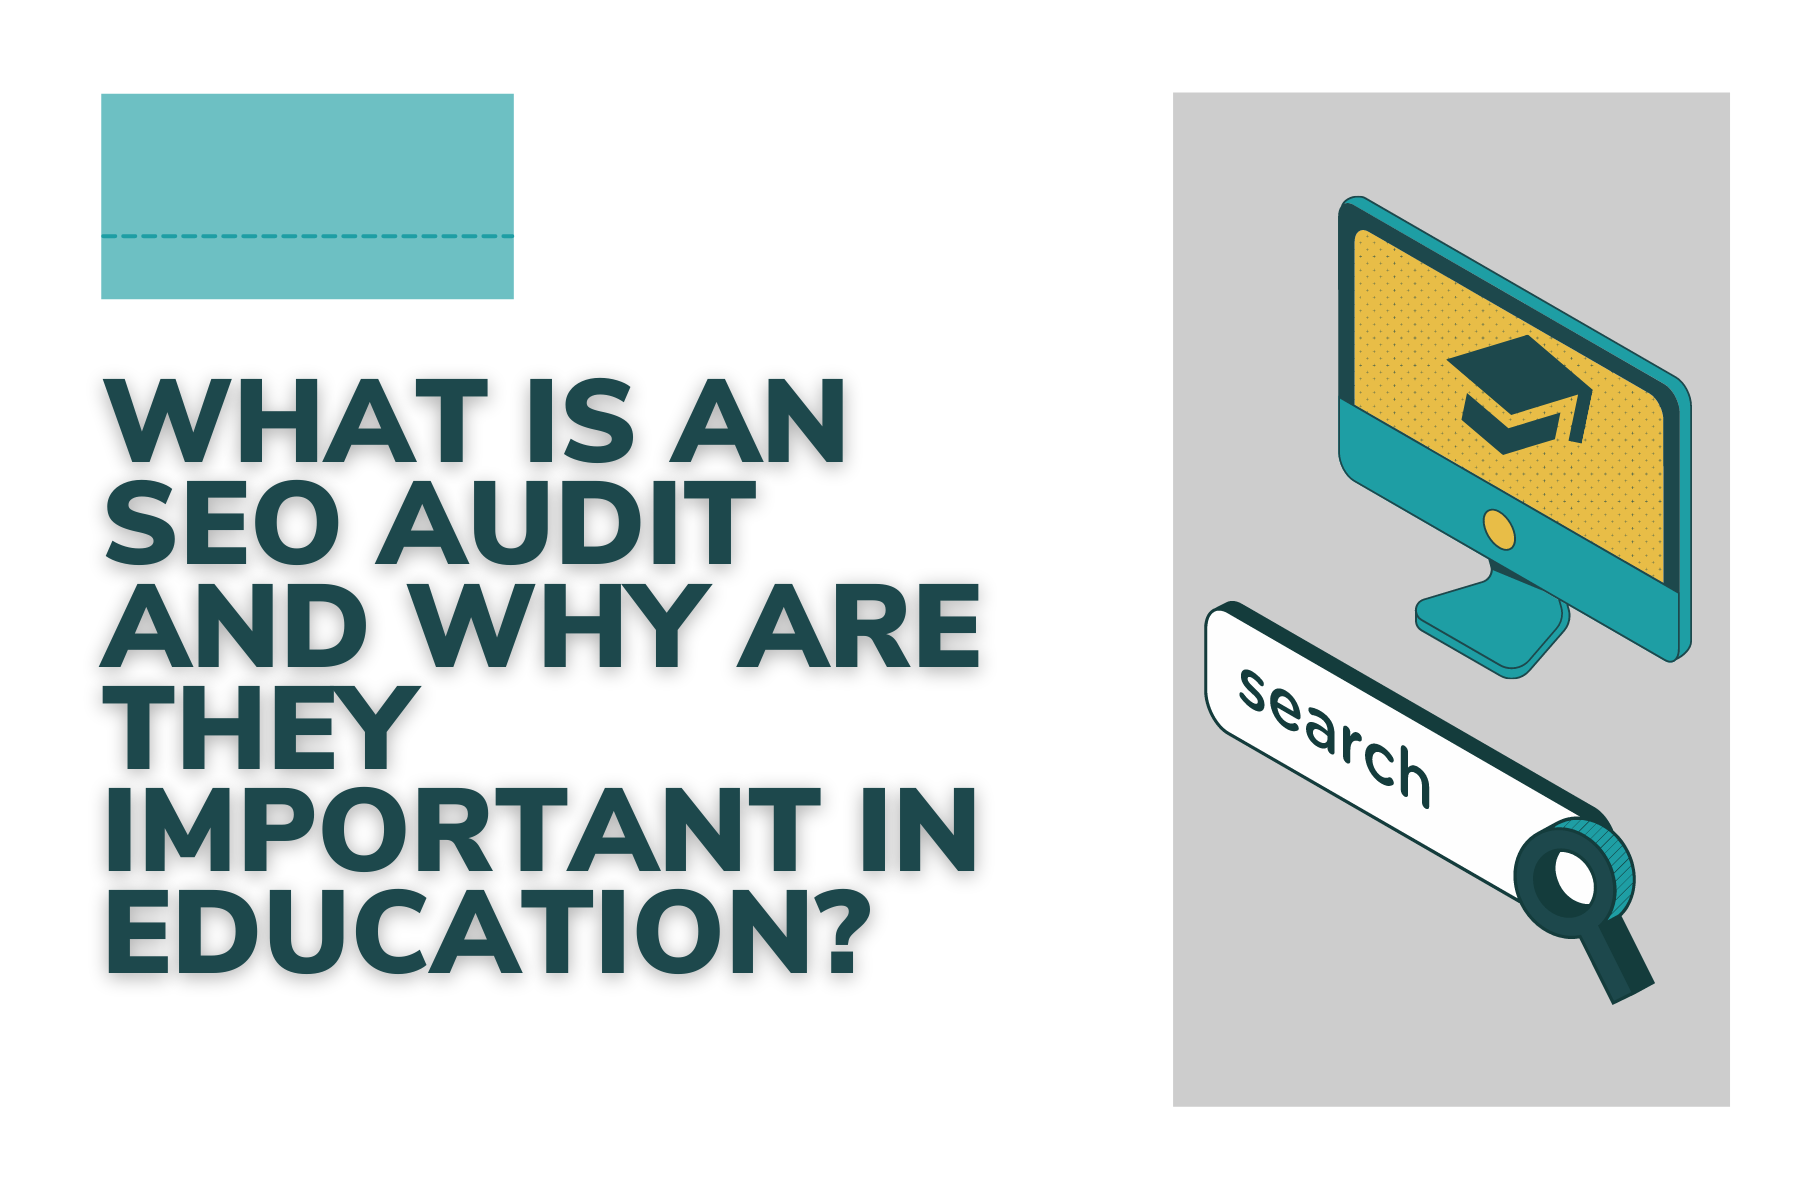 What is an SEO audit and why are they important in education?